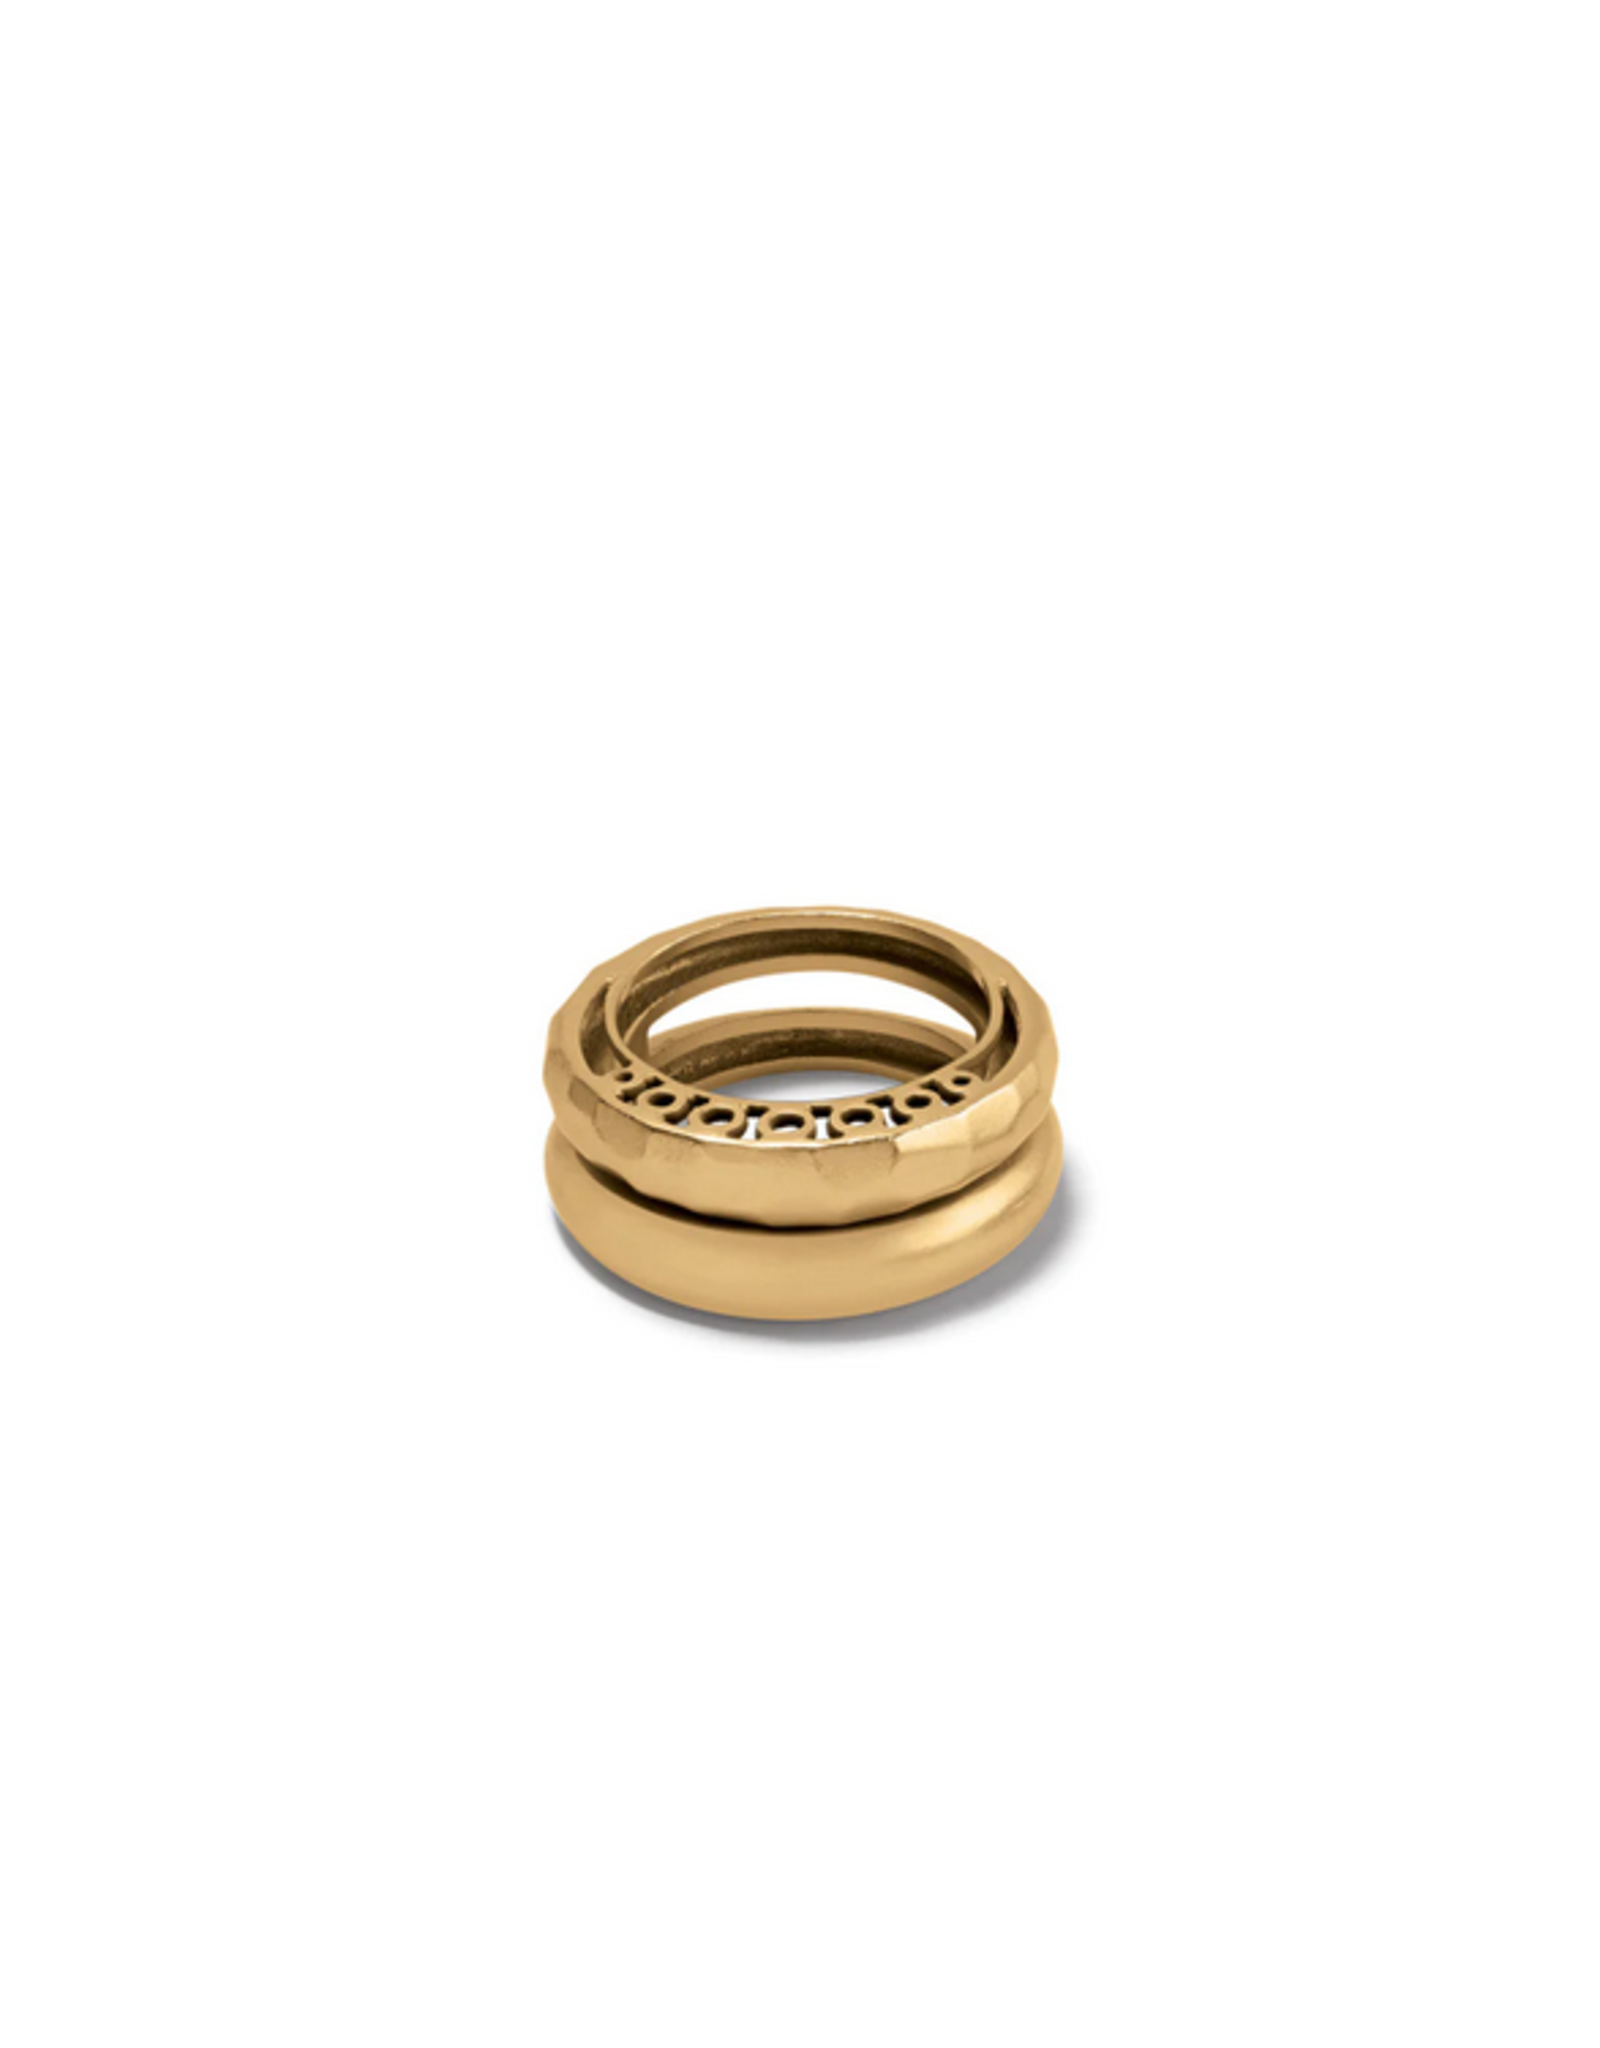 Brighton Inner Circle Double Ring Gold